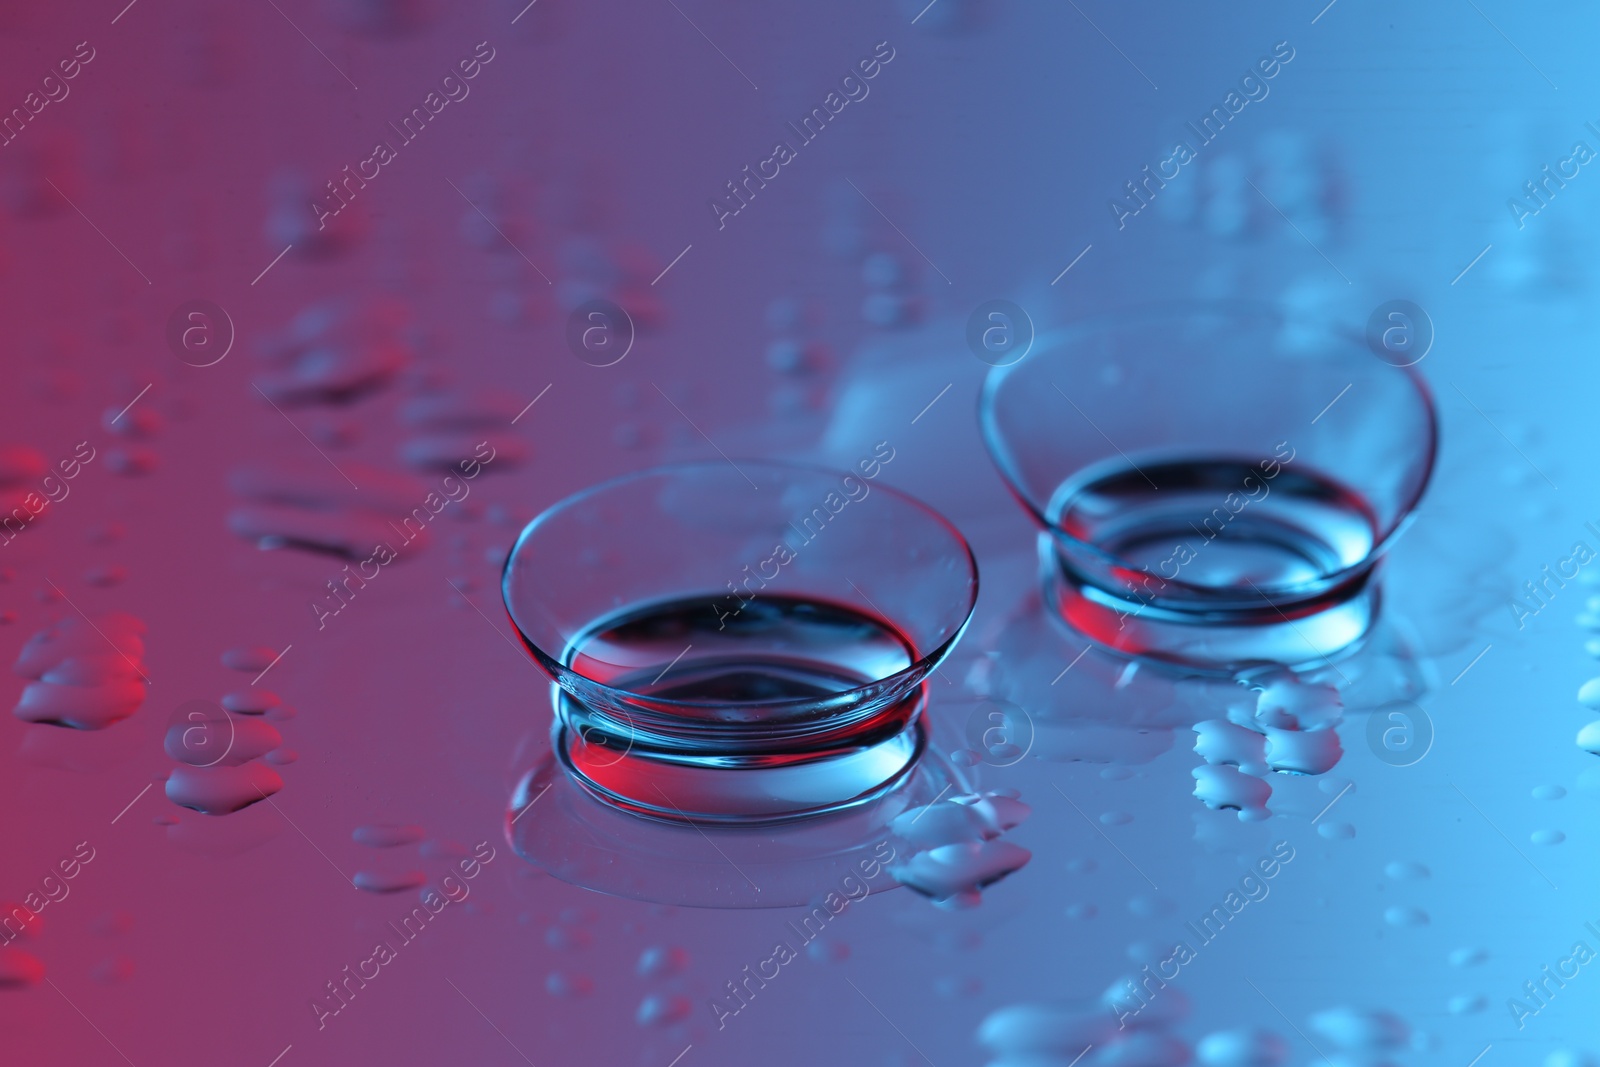 Photo of Pair of contact lenses on wet mirror surface, closeup